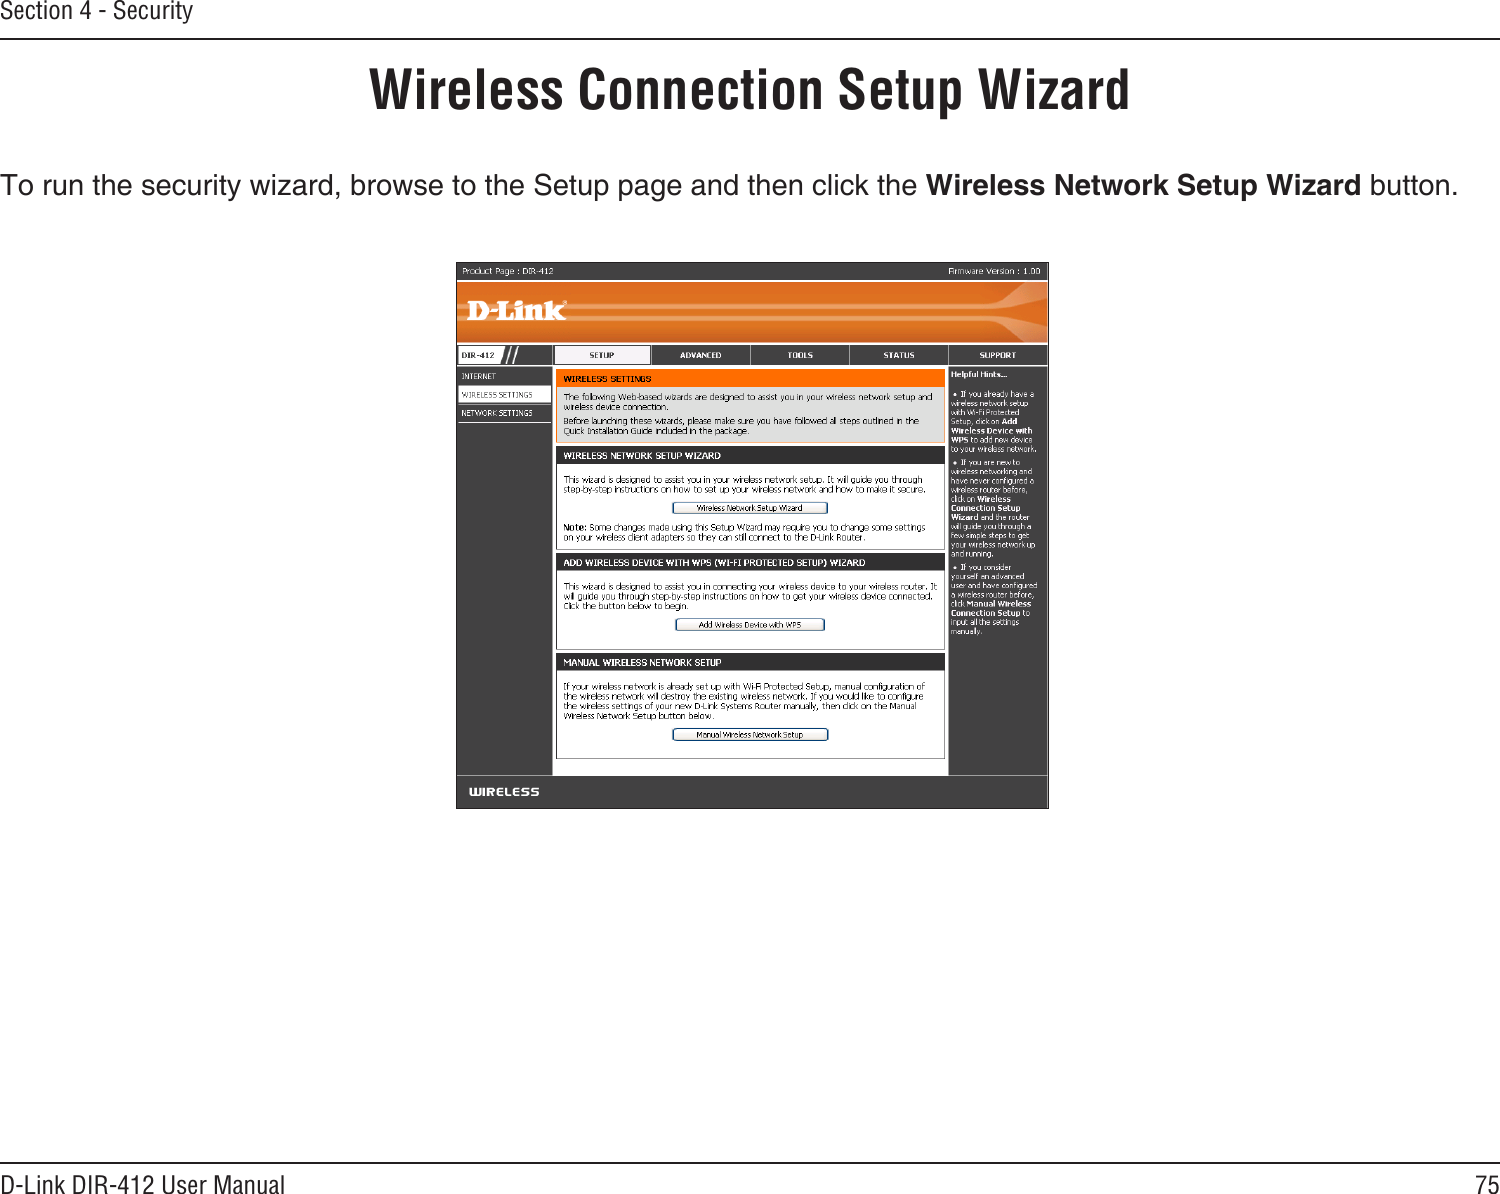 75D-Link DIR-412 User ManualSection 4 - SecurityWireless Connection Setup WizardTo run the security wizard, browse to the Setup page and then click the Wireless Network Setup Wizard button. 